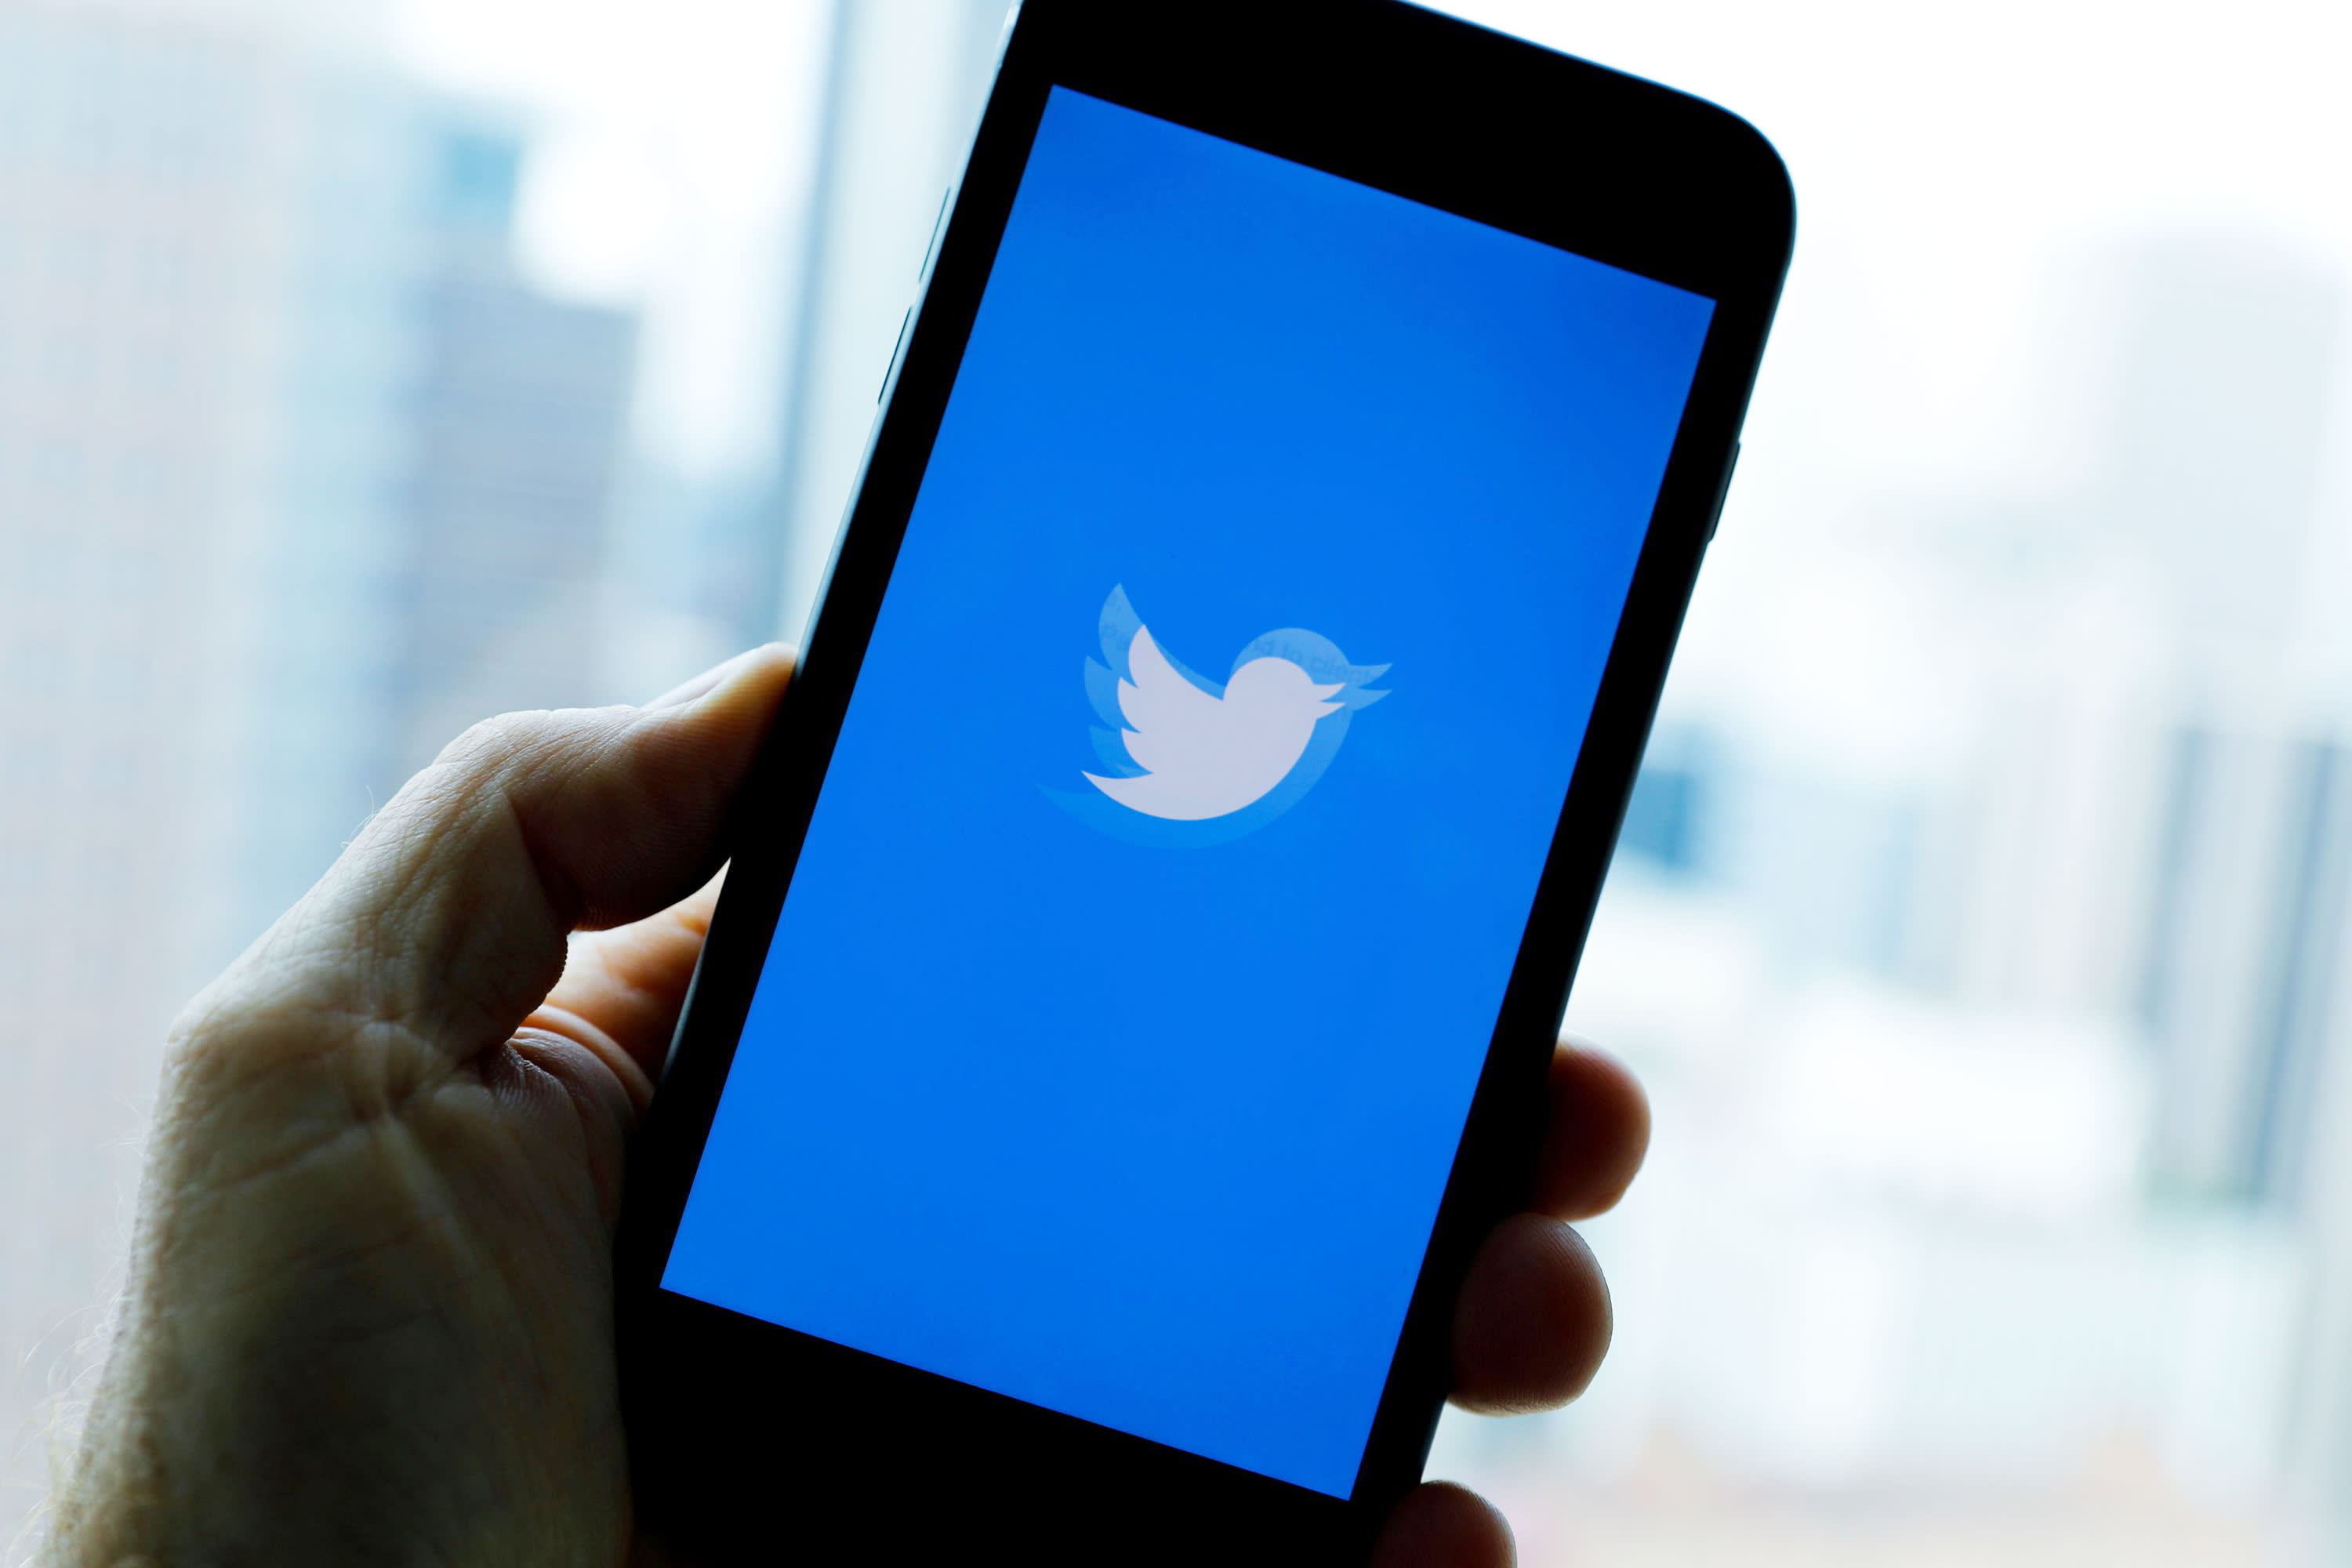 India scolds Twitter for not fully complying with government order